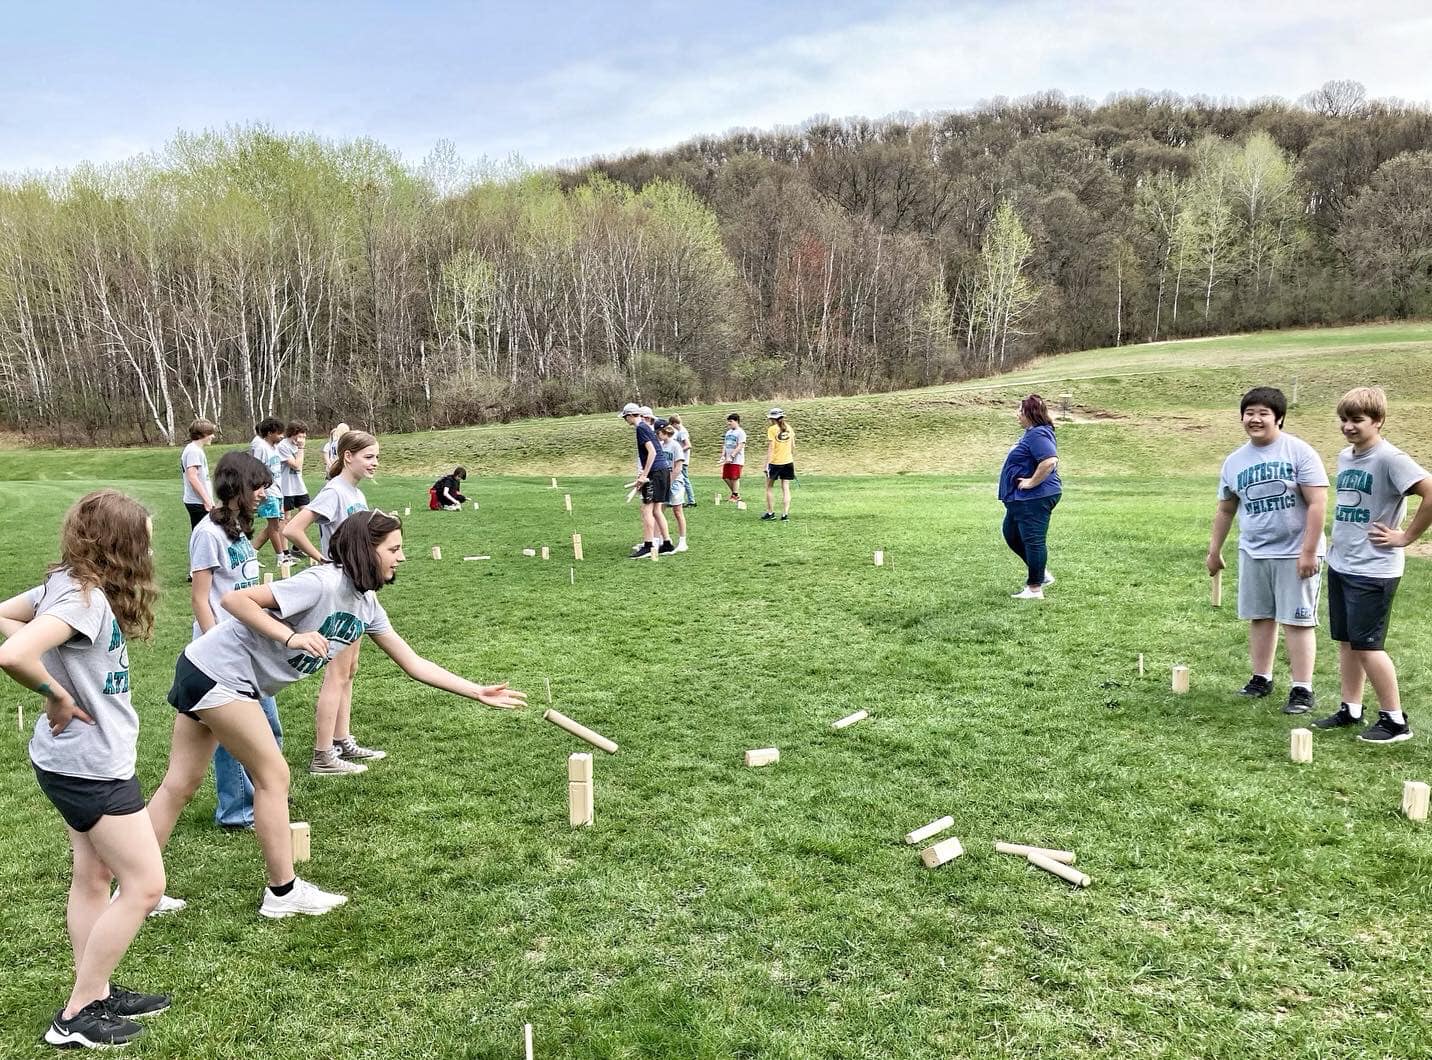 Kids wearing gym t-shirts throw wooden kubb batons in a green field